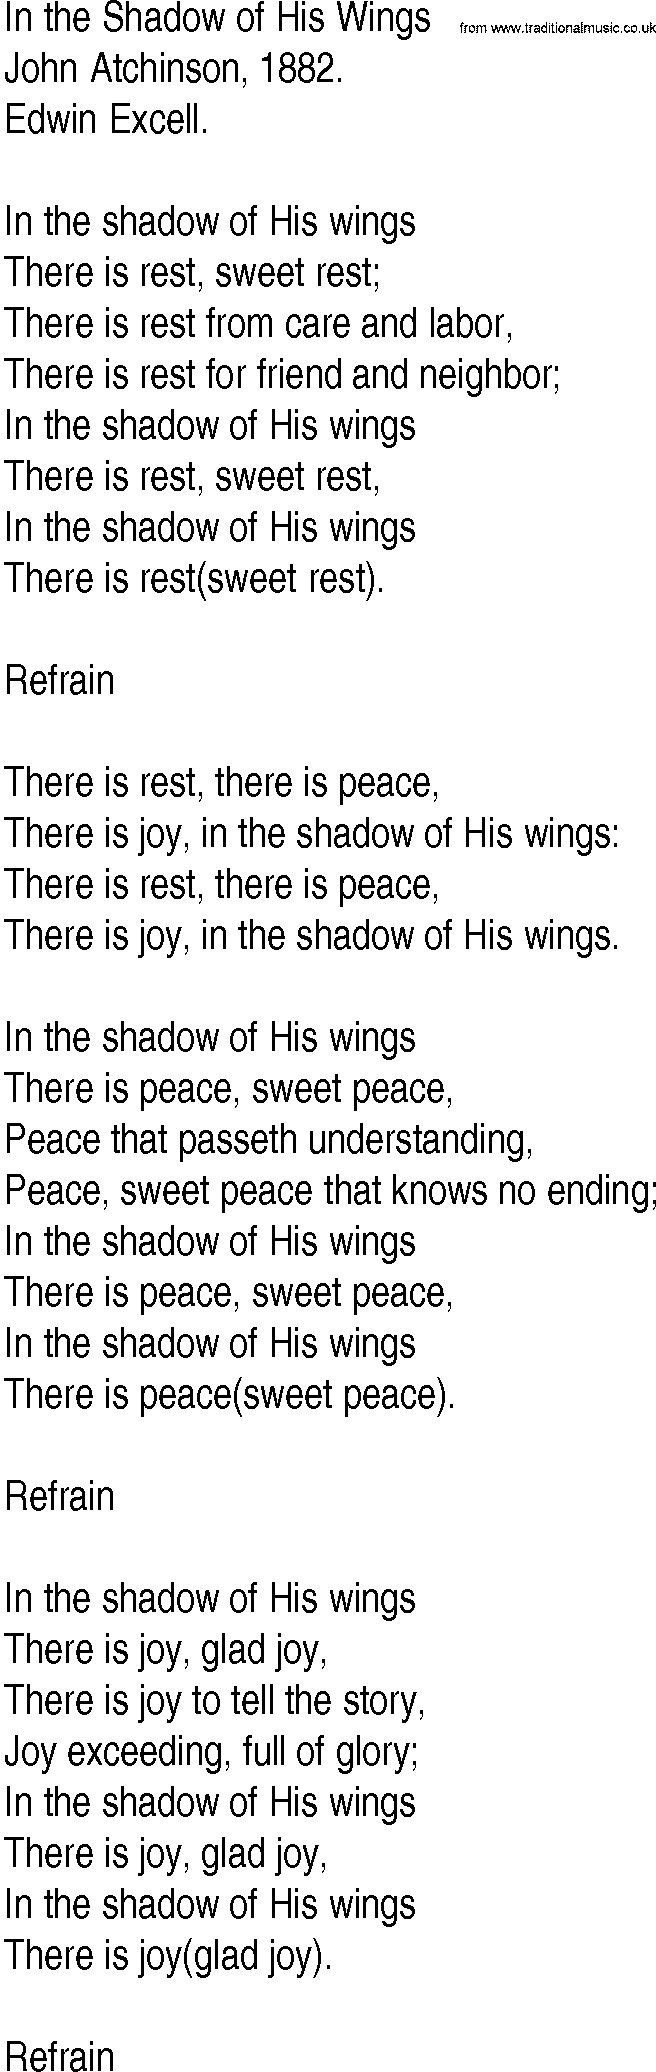 Hymn and Gospel Song: In the Shadow of His Wings by John Atchinson lyrics